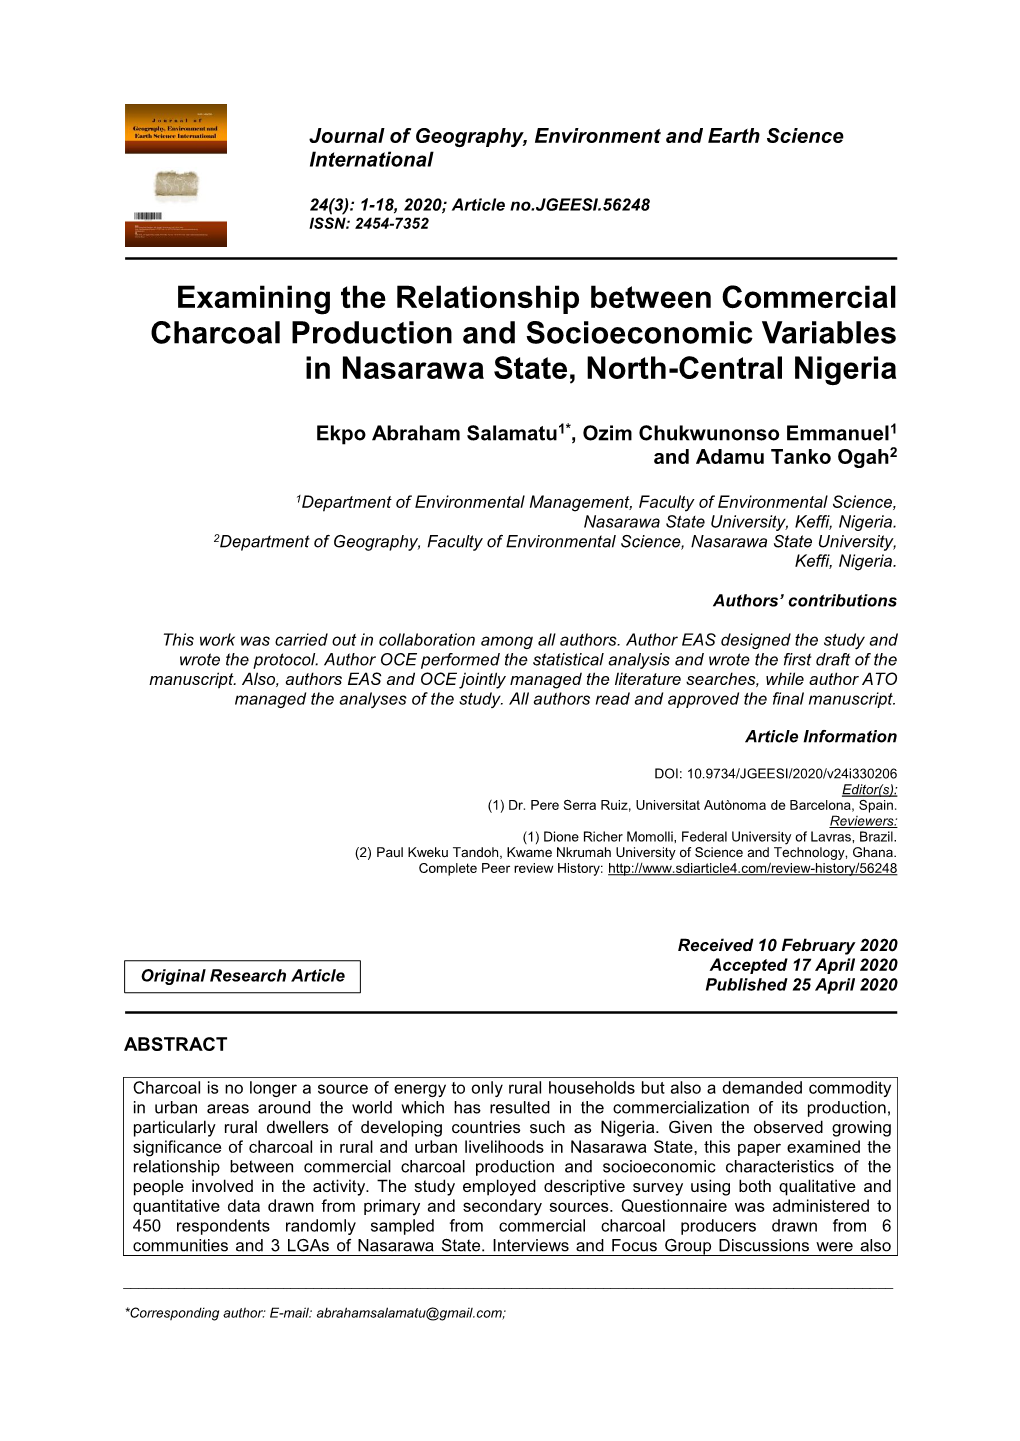 Examining the Relationship Between Commercial Charcoal Production and Socioeconomic Variables in Nasarawa State, North-Central Nigeria